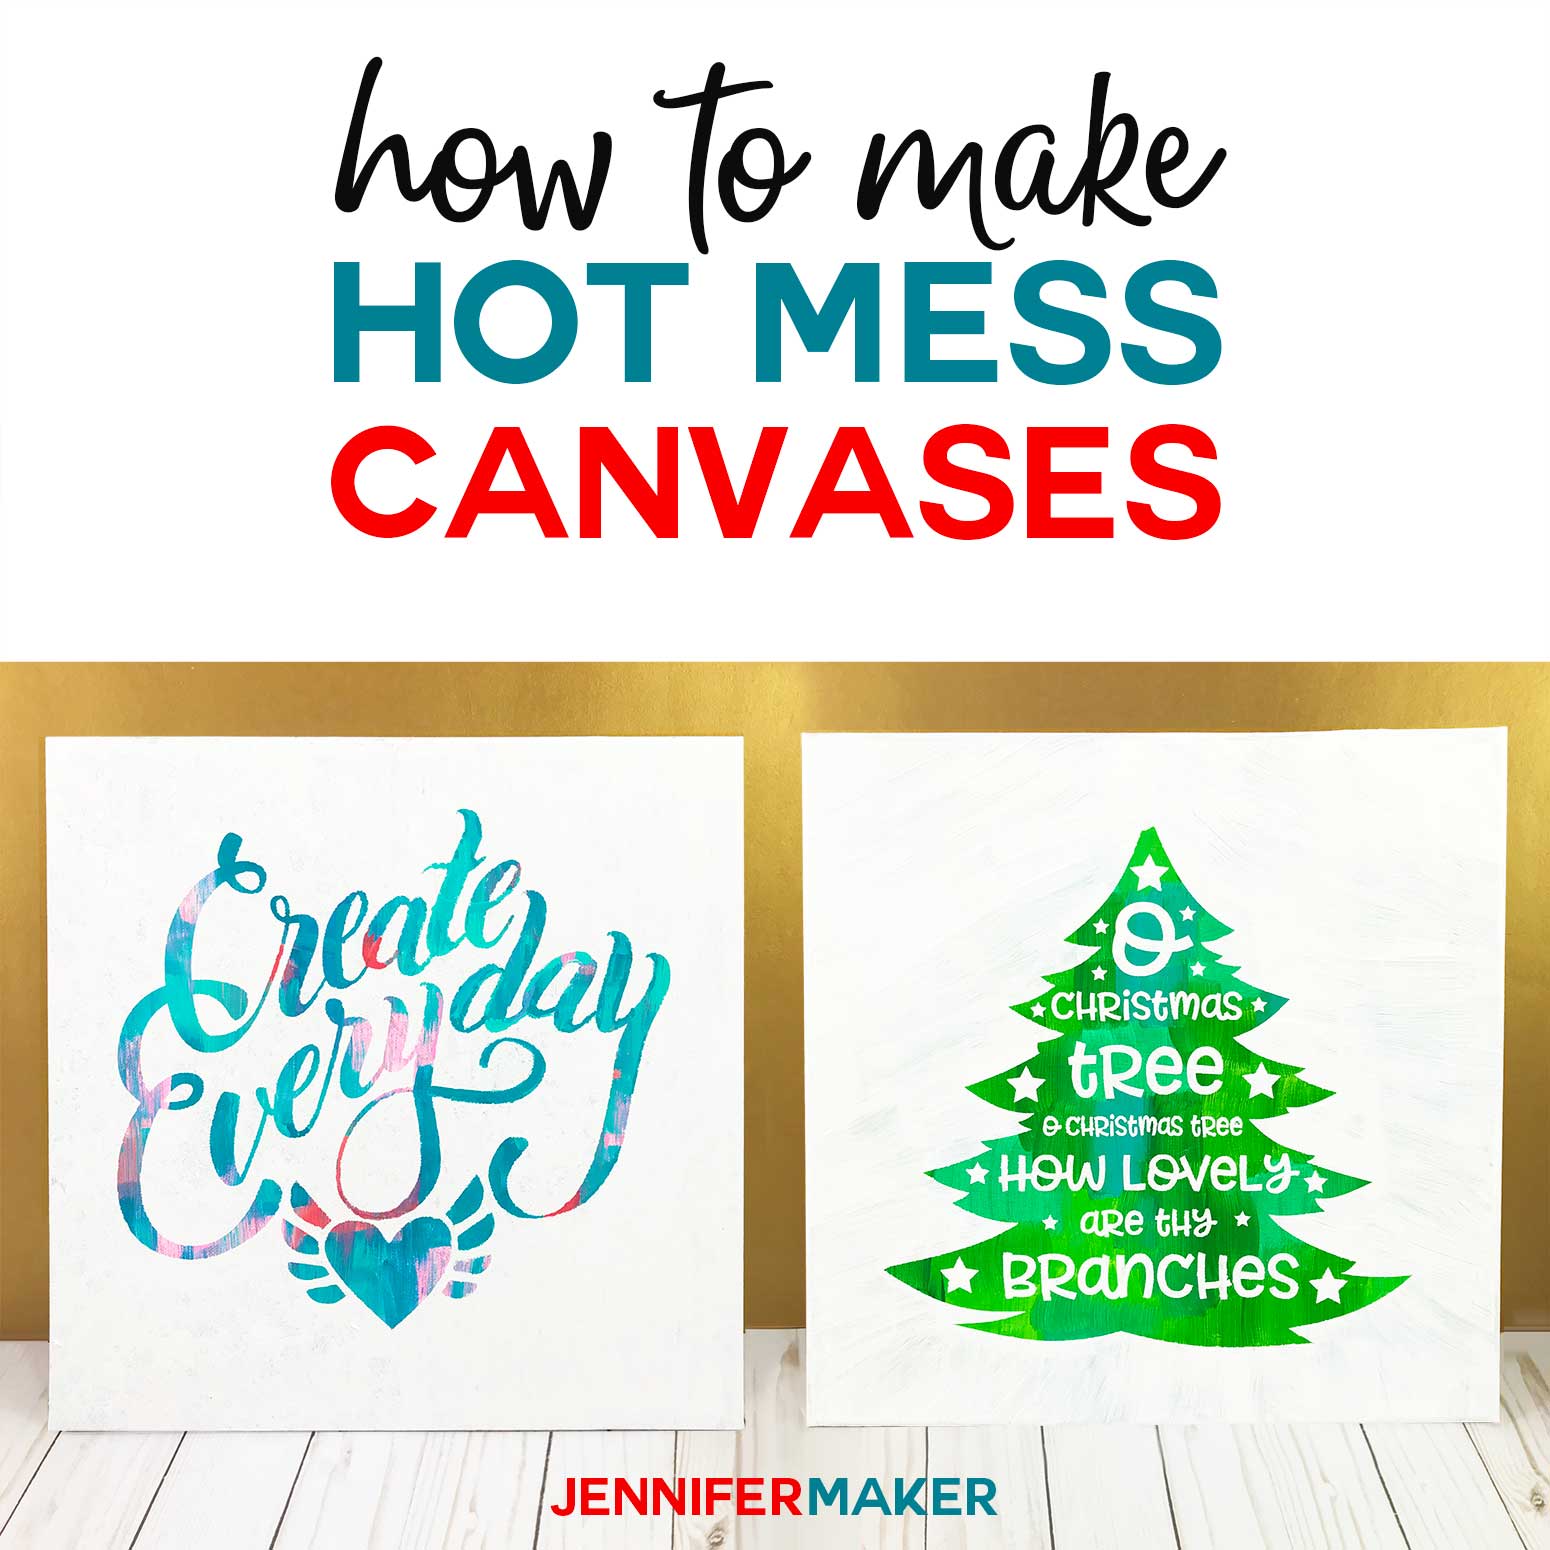 How to make hot mess canvas projects with a Cricut #cricut #canvas #paint #vinyl #svgcutfile